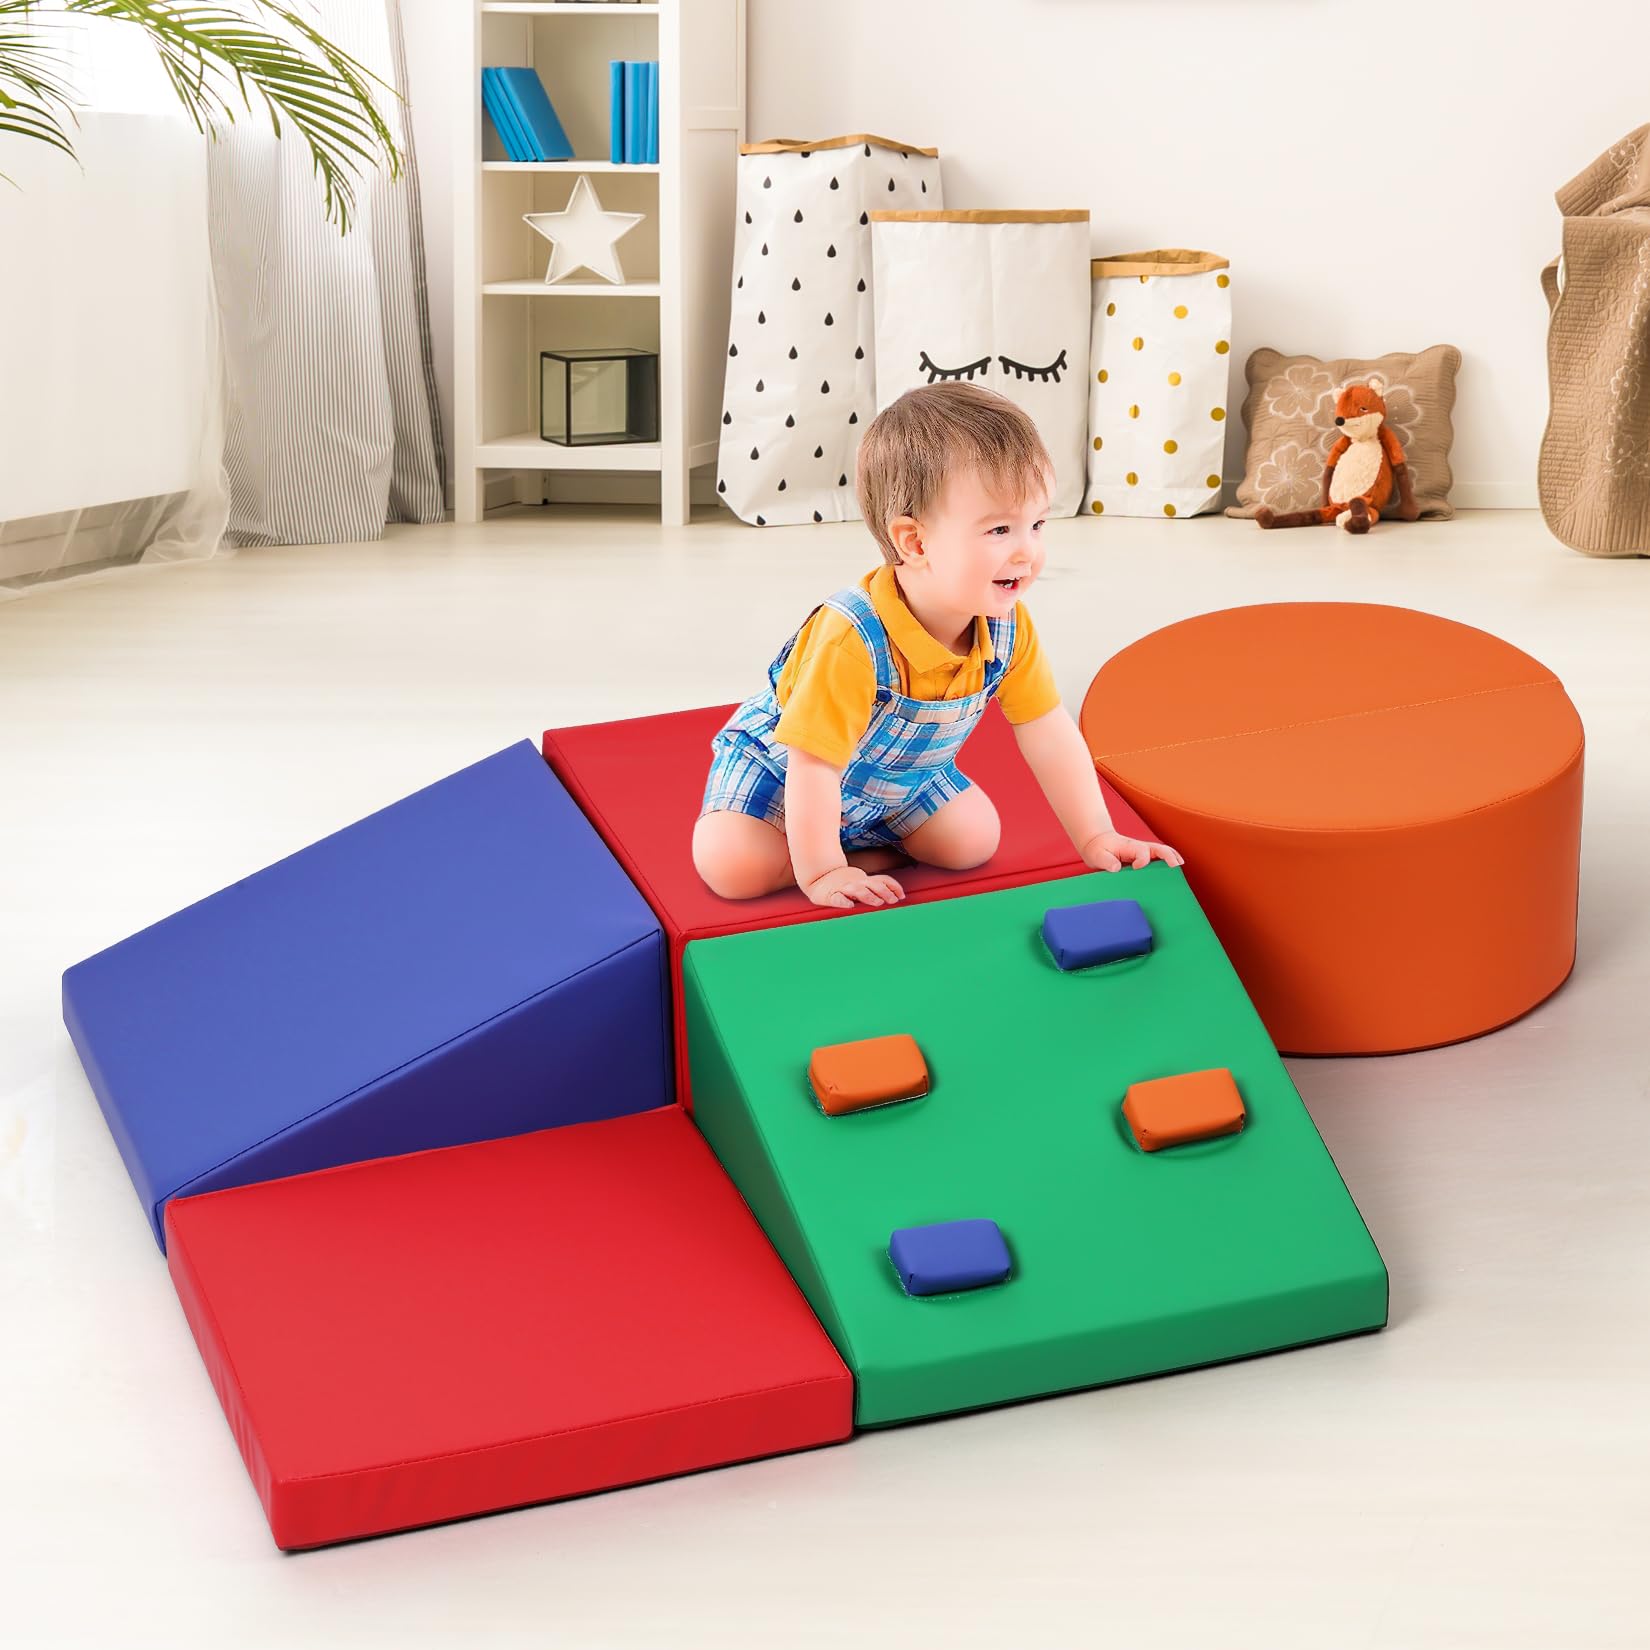 GAOMON Foam Climbing Blocks for Toddlers and Preschoolers - Soft Climbing Indoor Set - Active Play Set for Climbing, Crawling, and Sliding, 5PCS